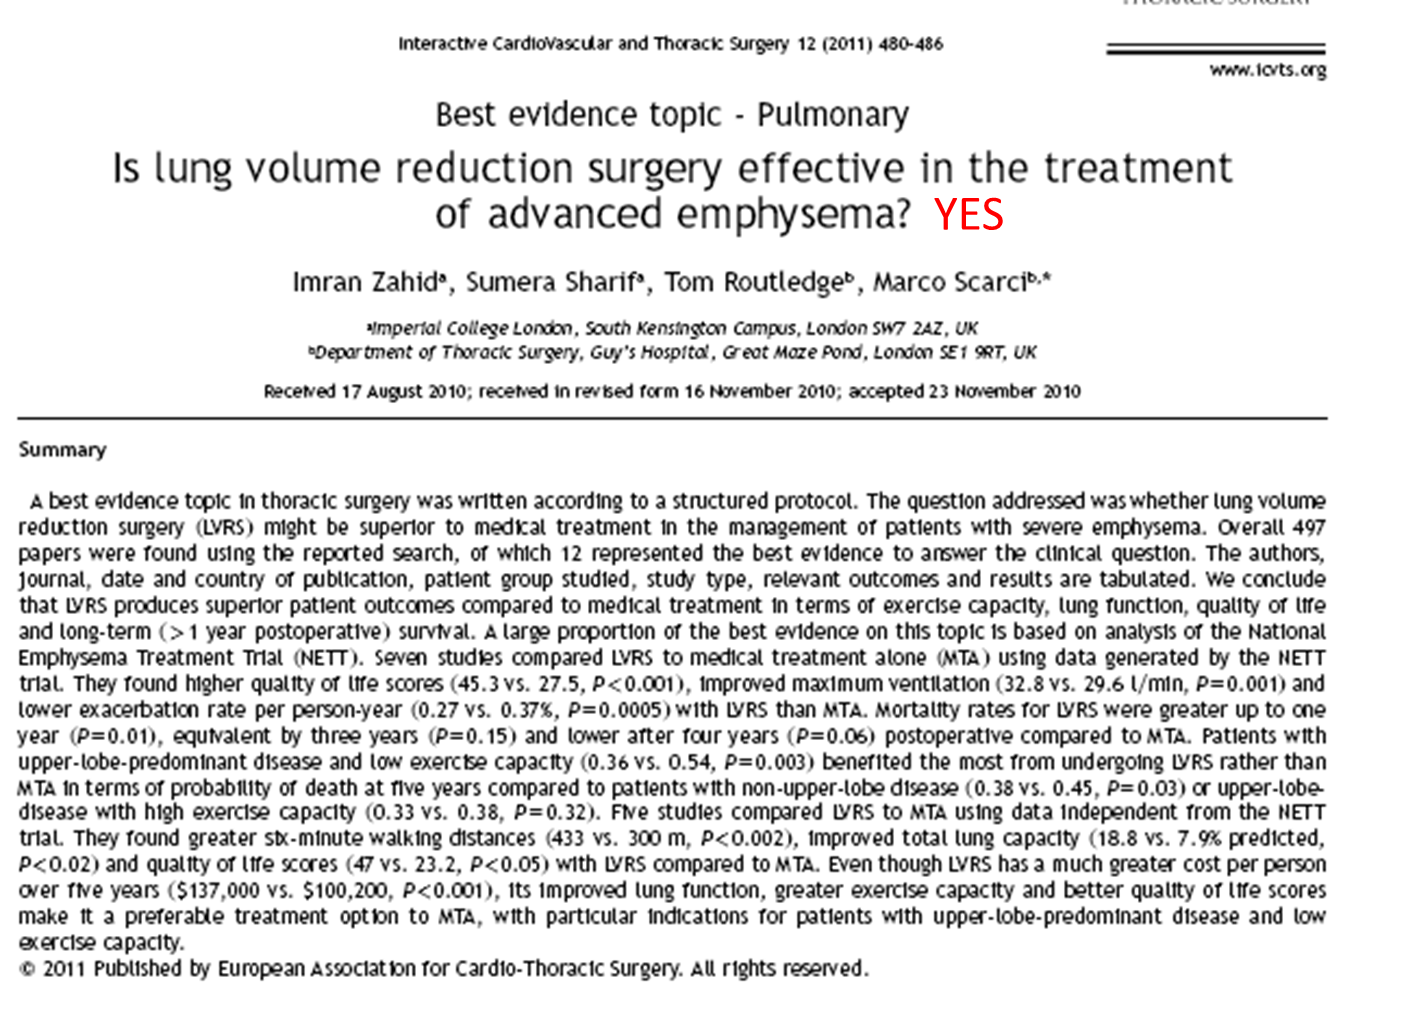 Click to view: Best evidence topic: Is lung volume reduction surgery effective in the treatement of advaced emphysema? The answer is Yes.